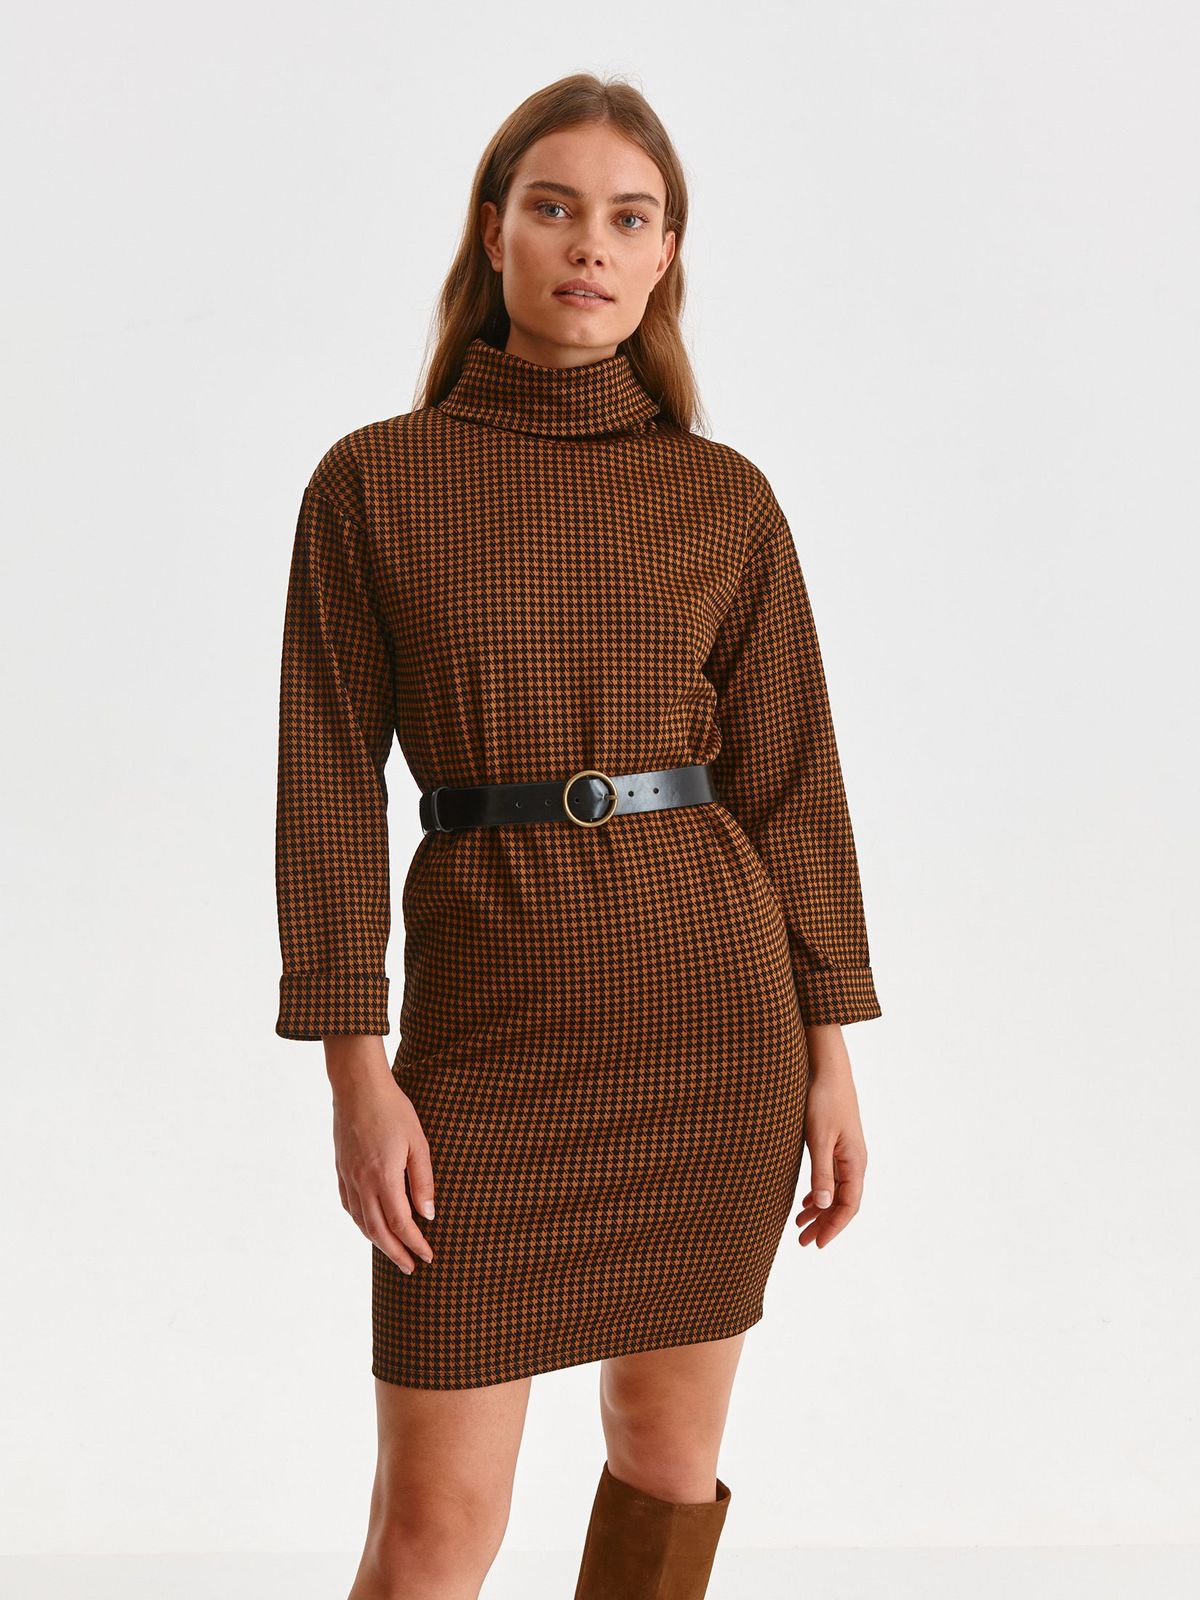 Brown dress cloth with turtle neck straight